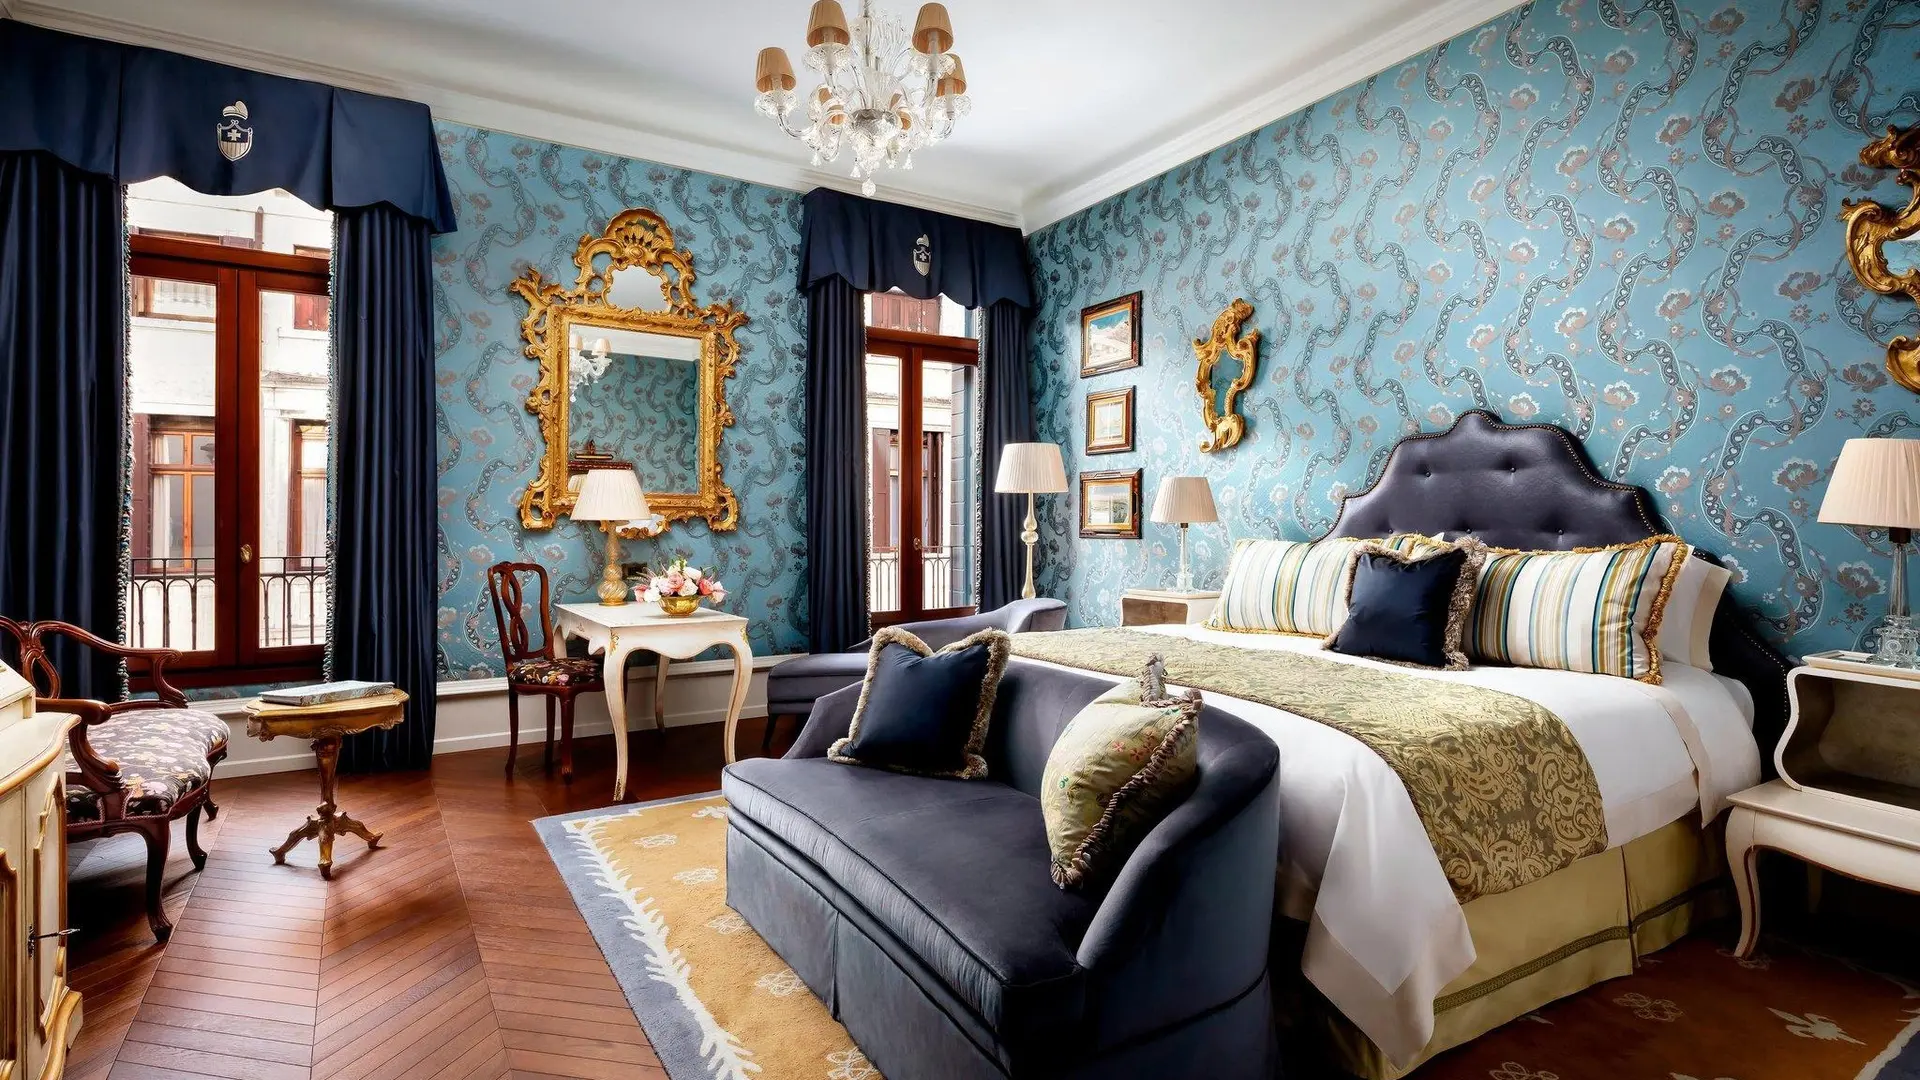 Suite at the Gritti Palace with blue design and view of the city